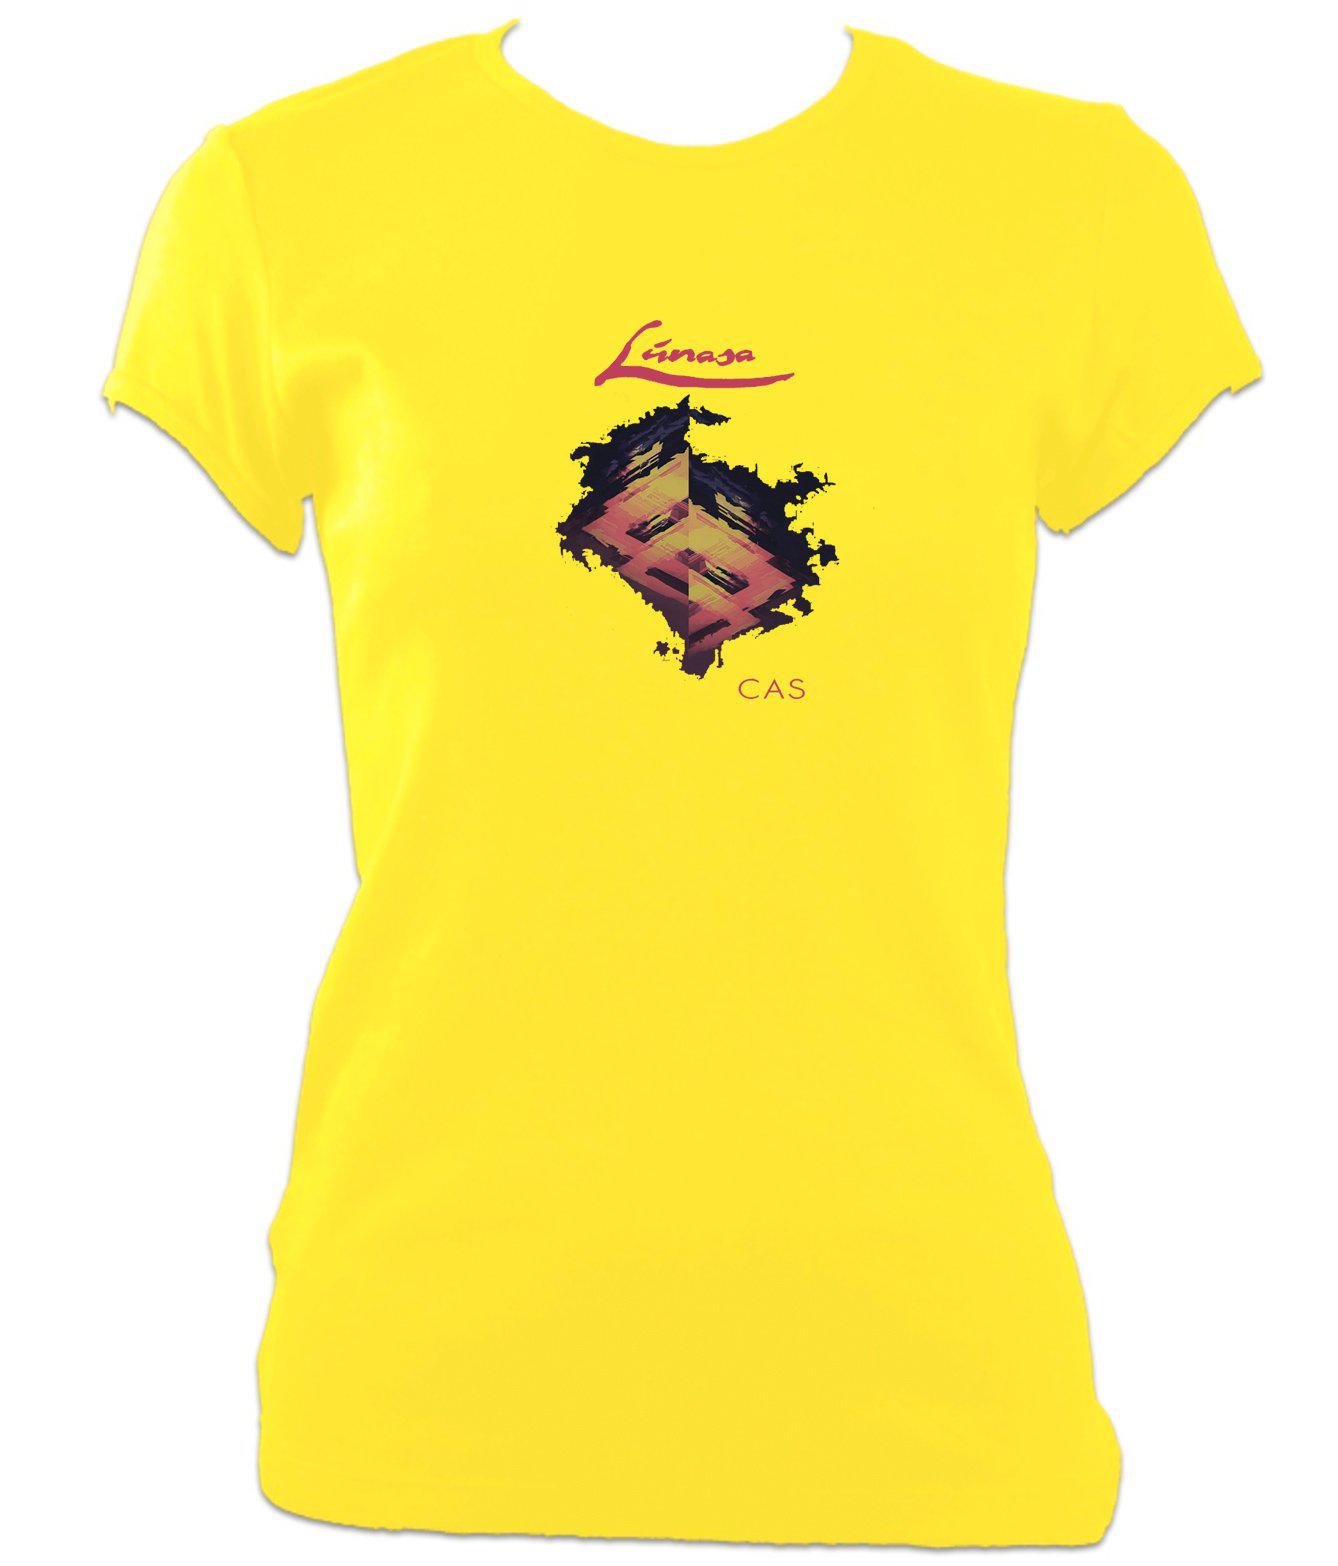 Lunasa Cas Ladies Fitted T-shirt - Yellow